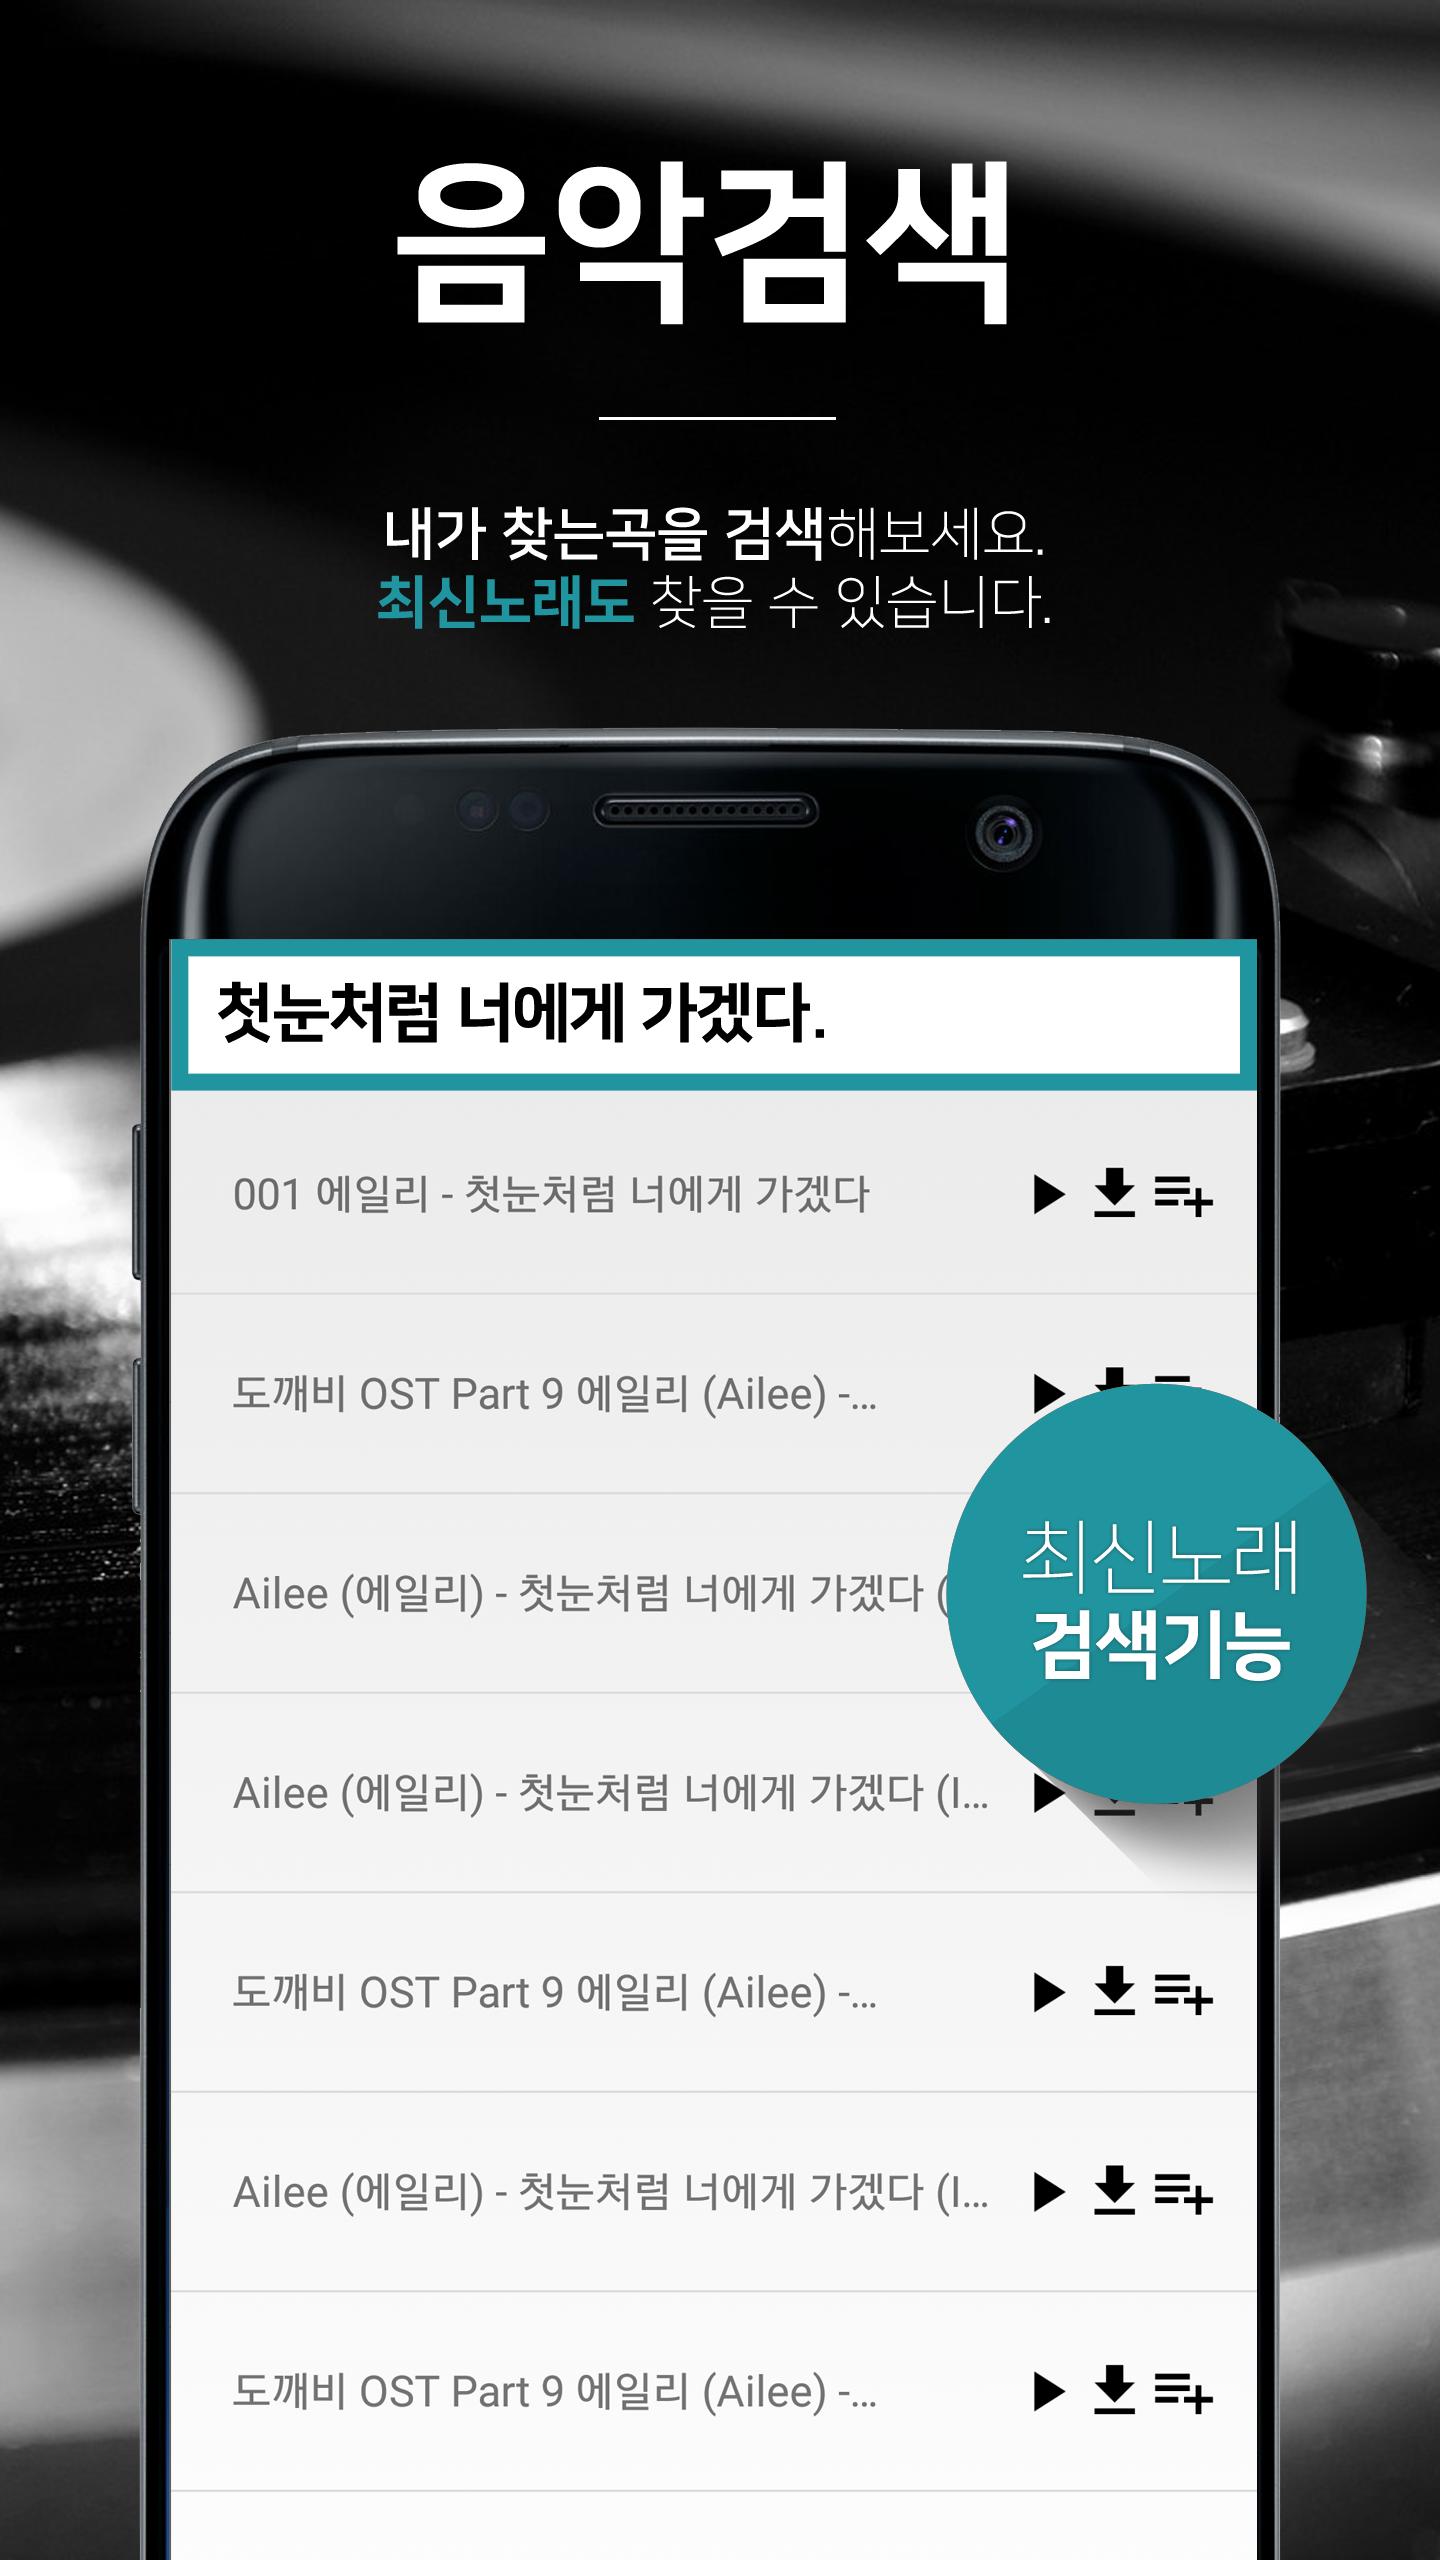 ë‹¤ëª¨ë®¤ì§� ë¬´ë£Œ ì�Œì•…ë‹¤ìš´,ë“£ê¸° for Android APK Download